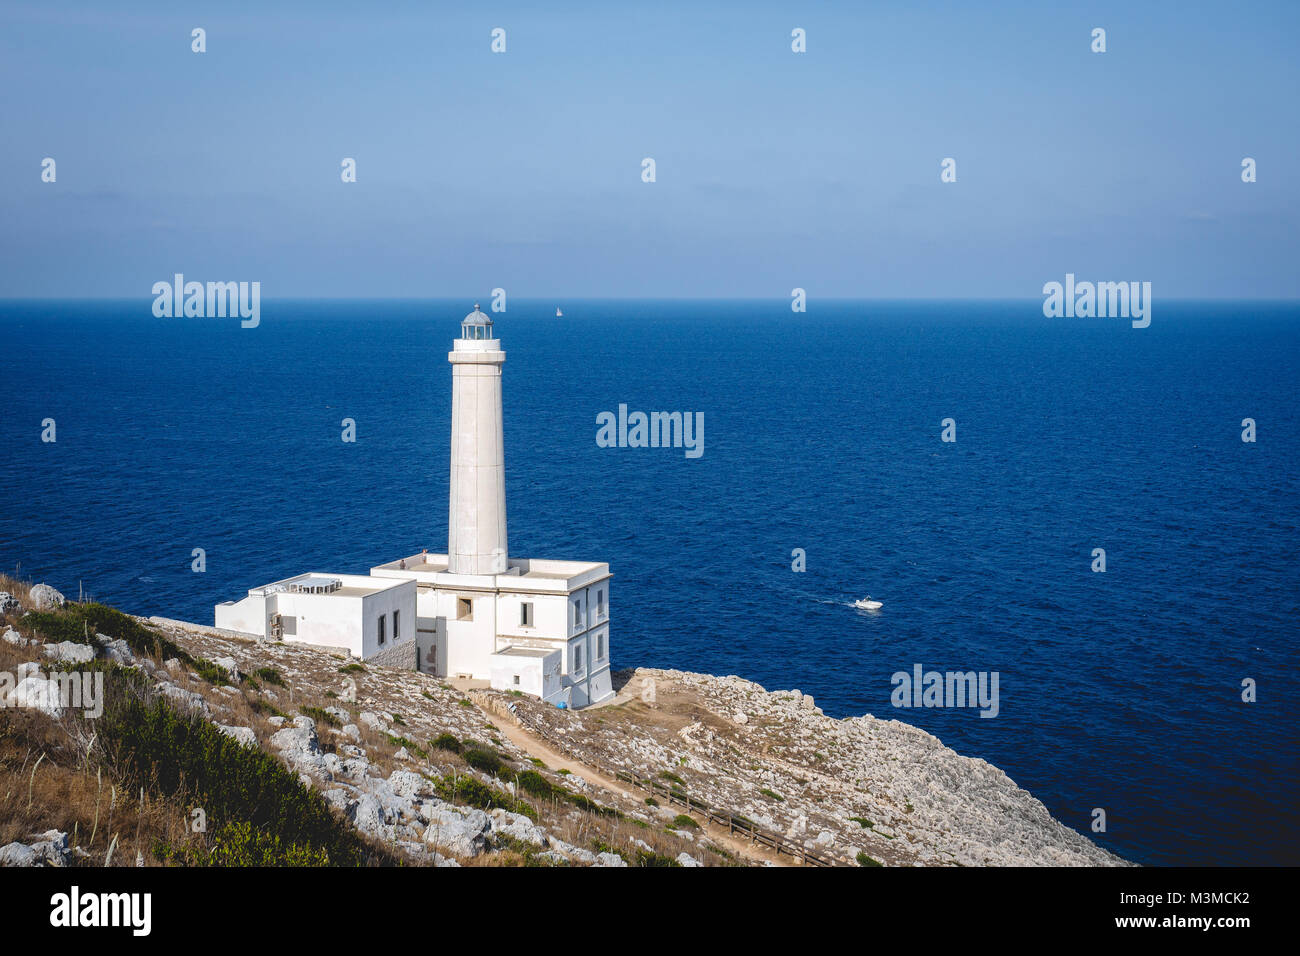 Otranto (Italy), August 2017. The lighthouse at Cape Palascia, near the Apulian town of Otranto, Italy's most easterly point. Landscape format. Stock Photo